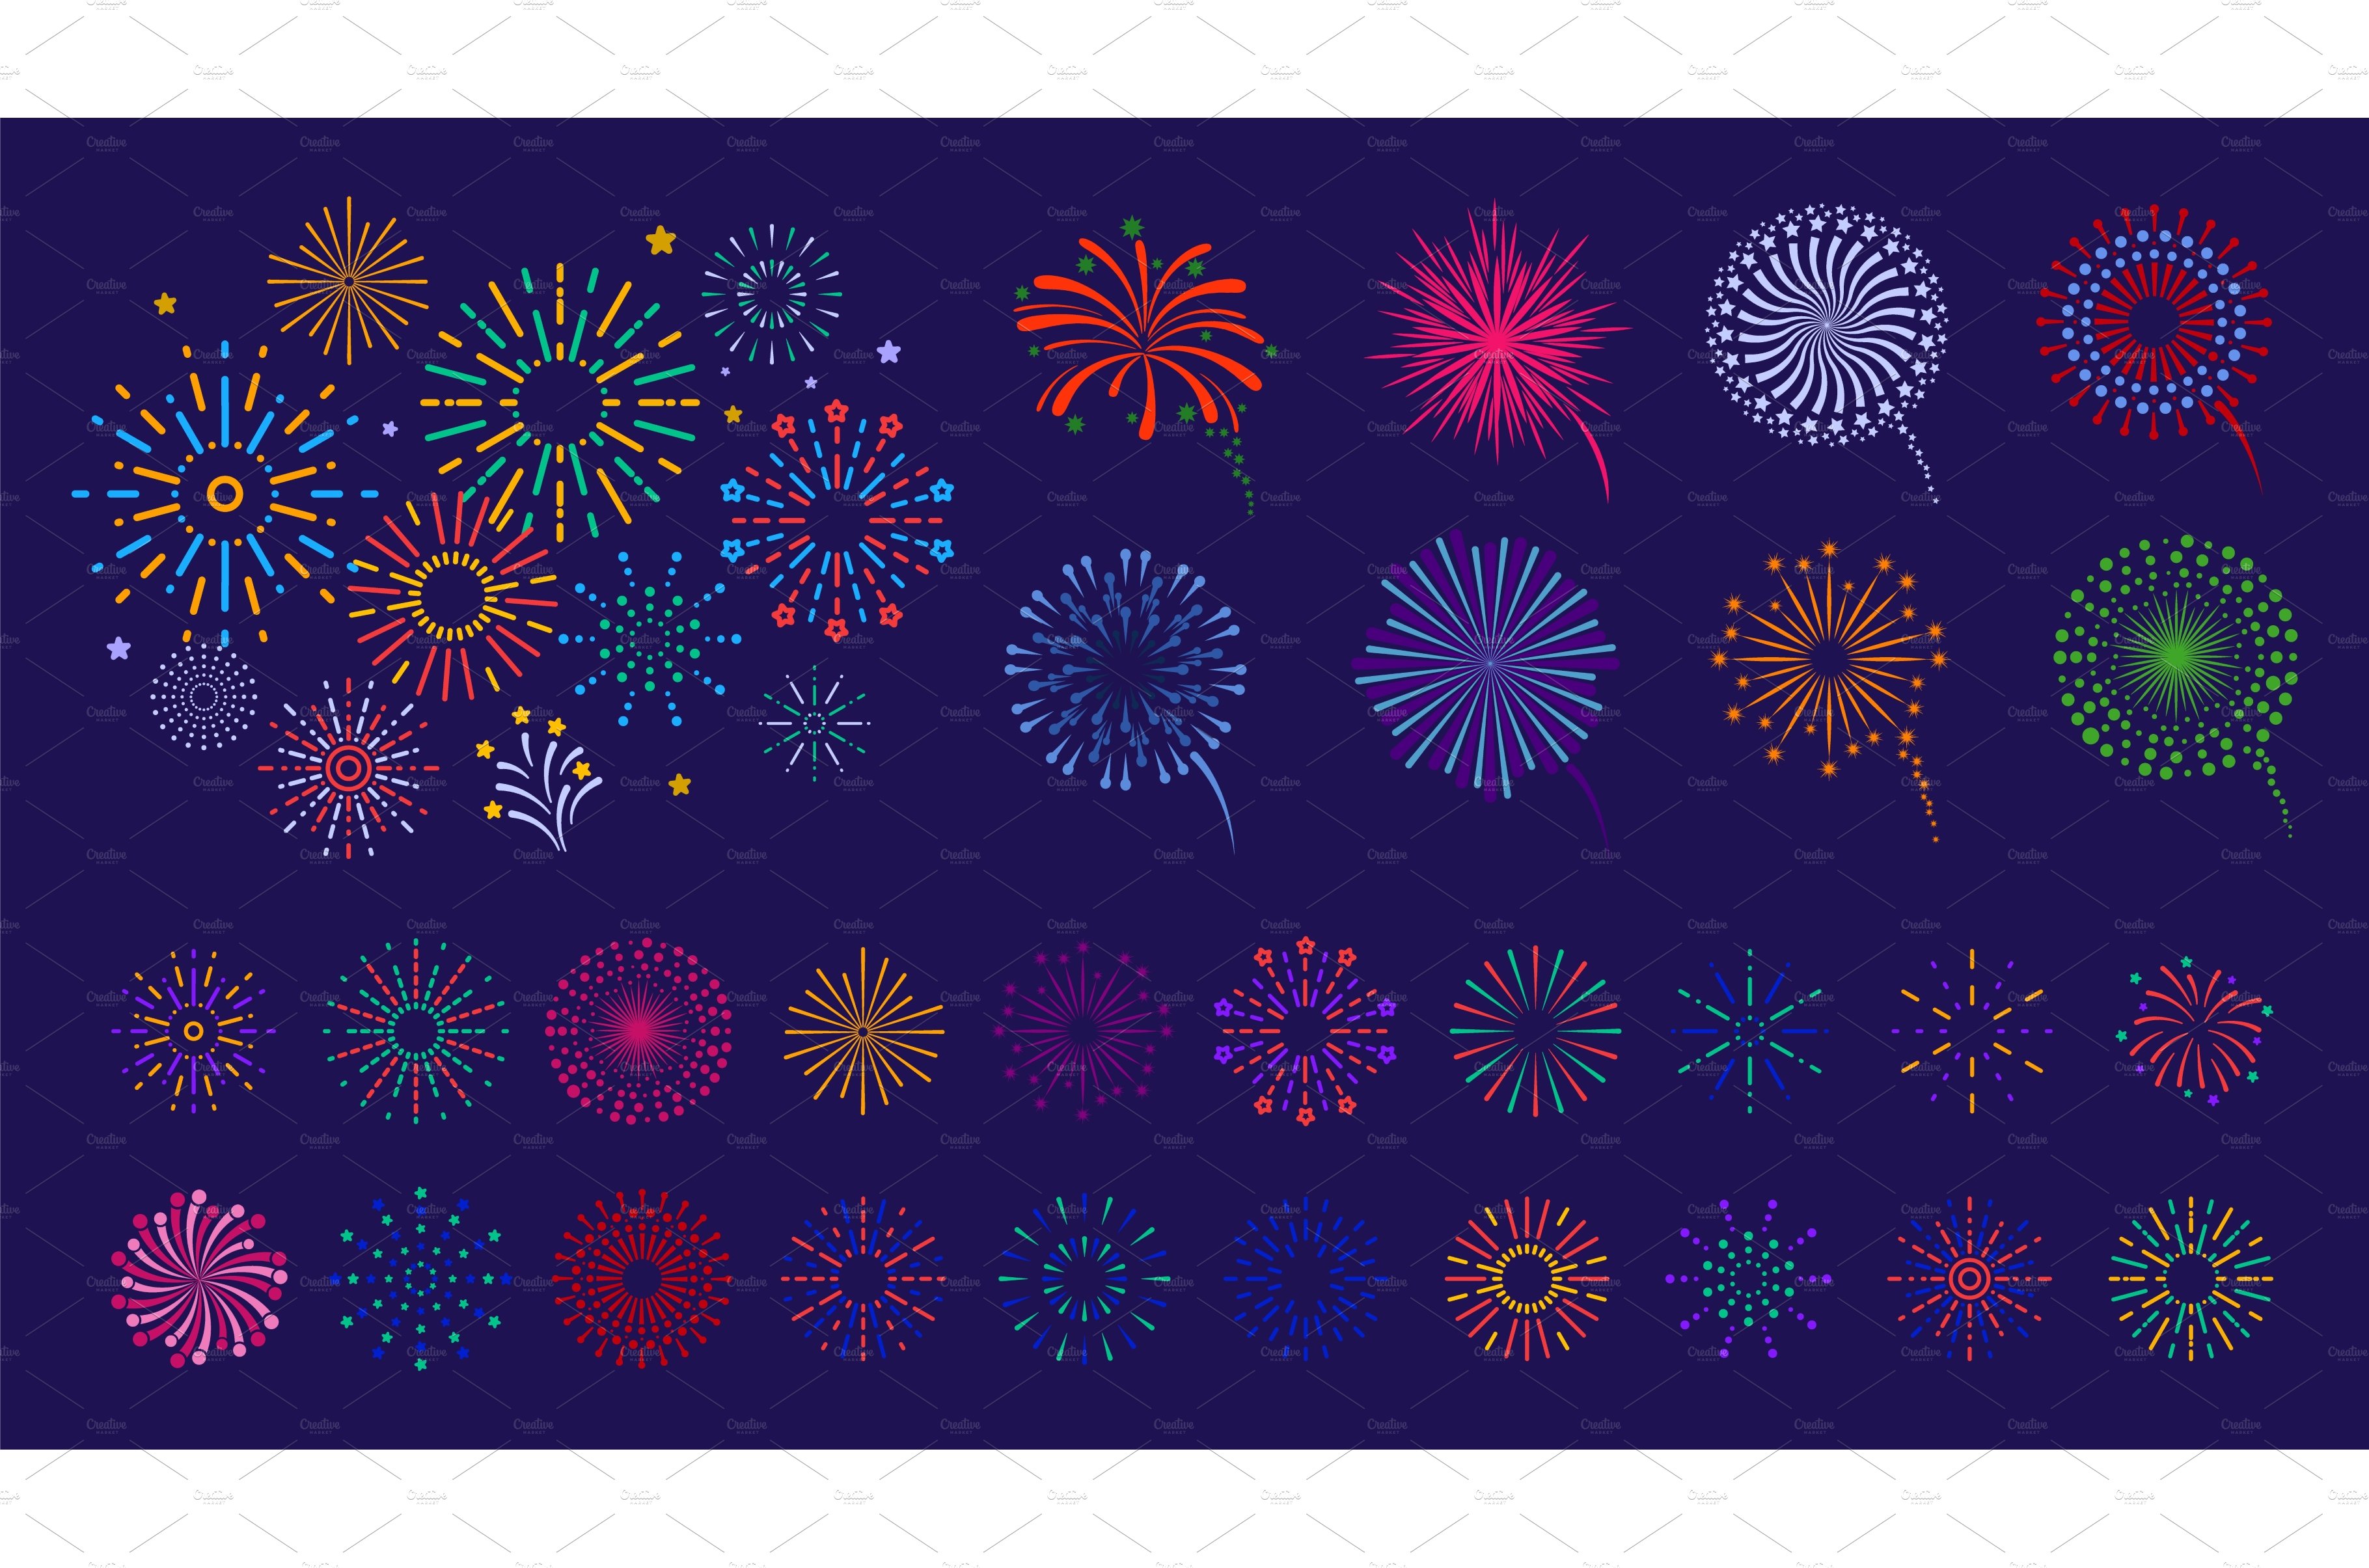 Firework collection. Color fireworks cover image.